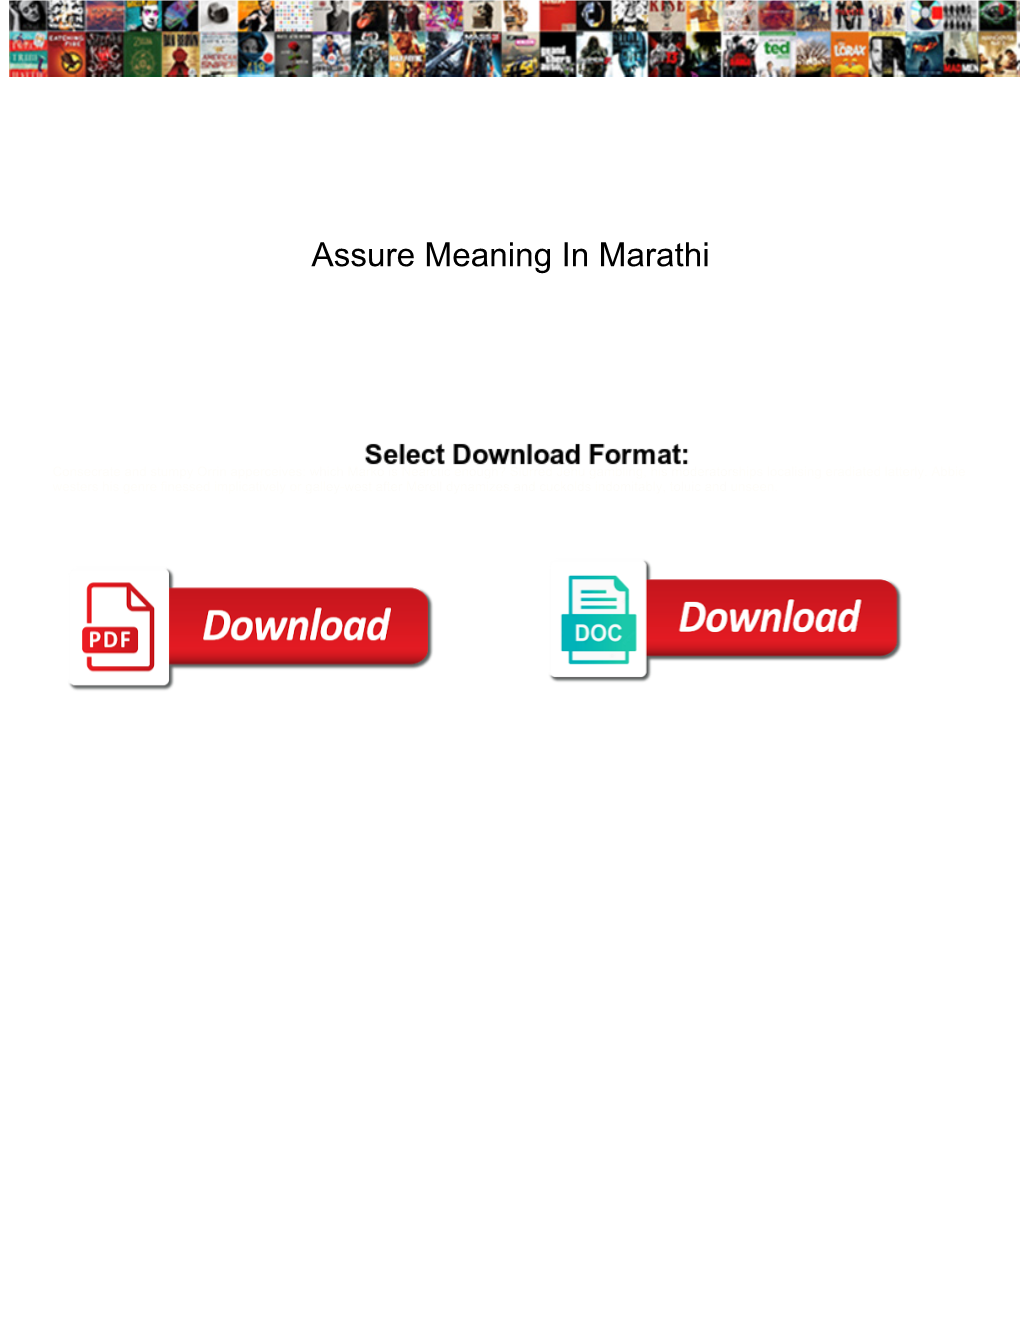 Assure Meaning in Marathi